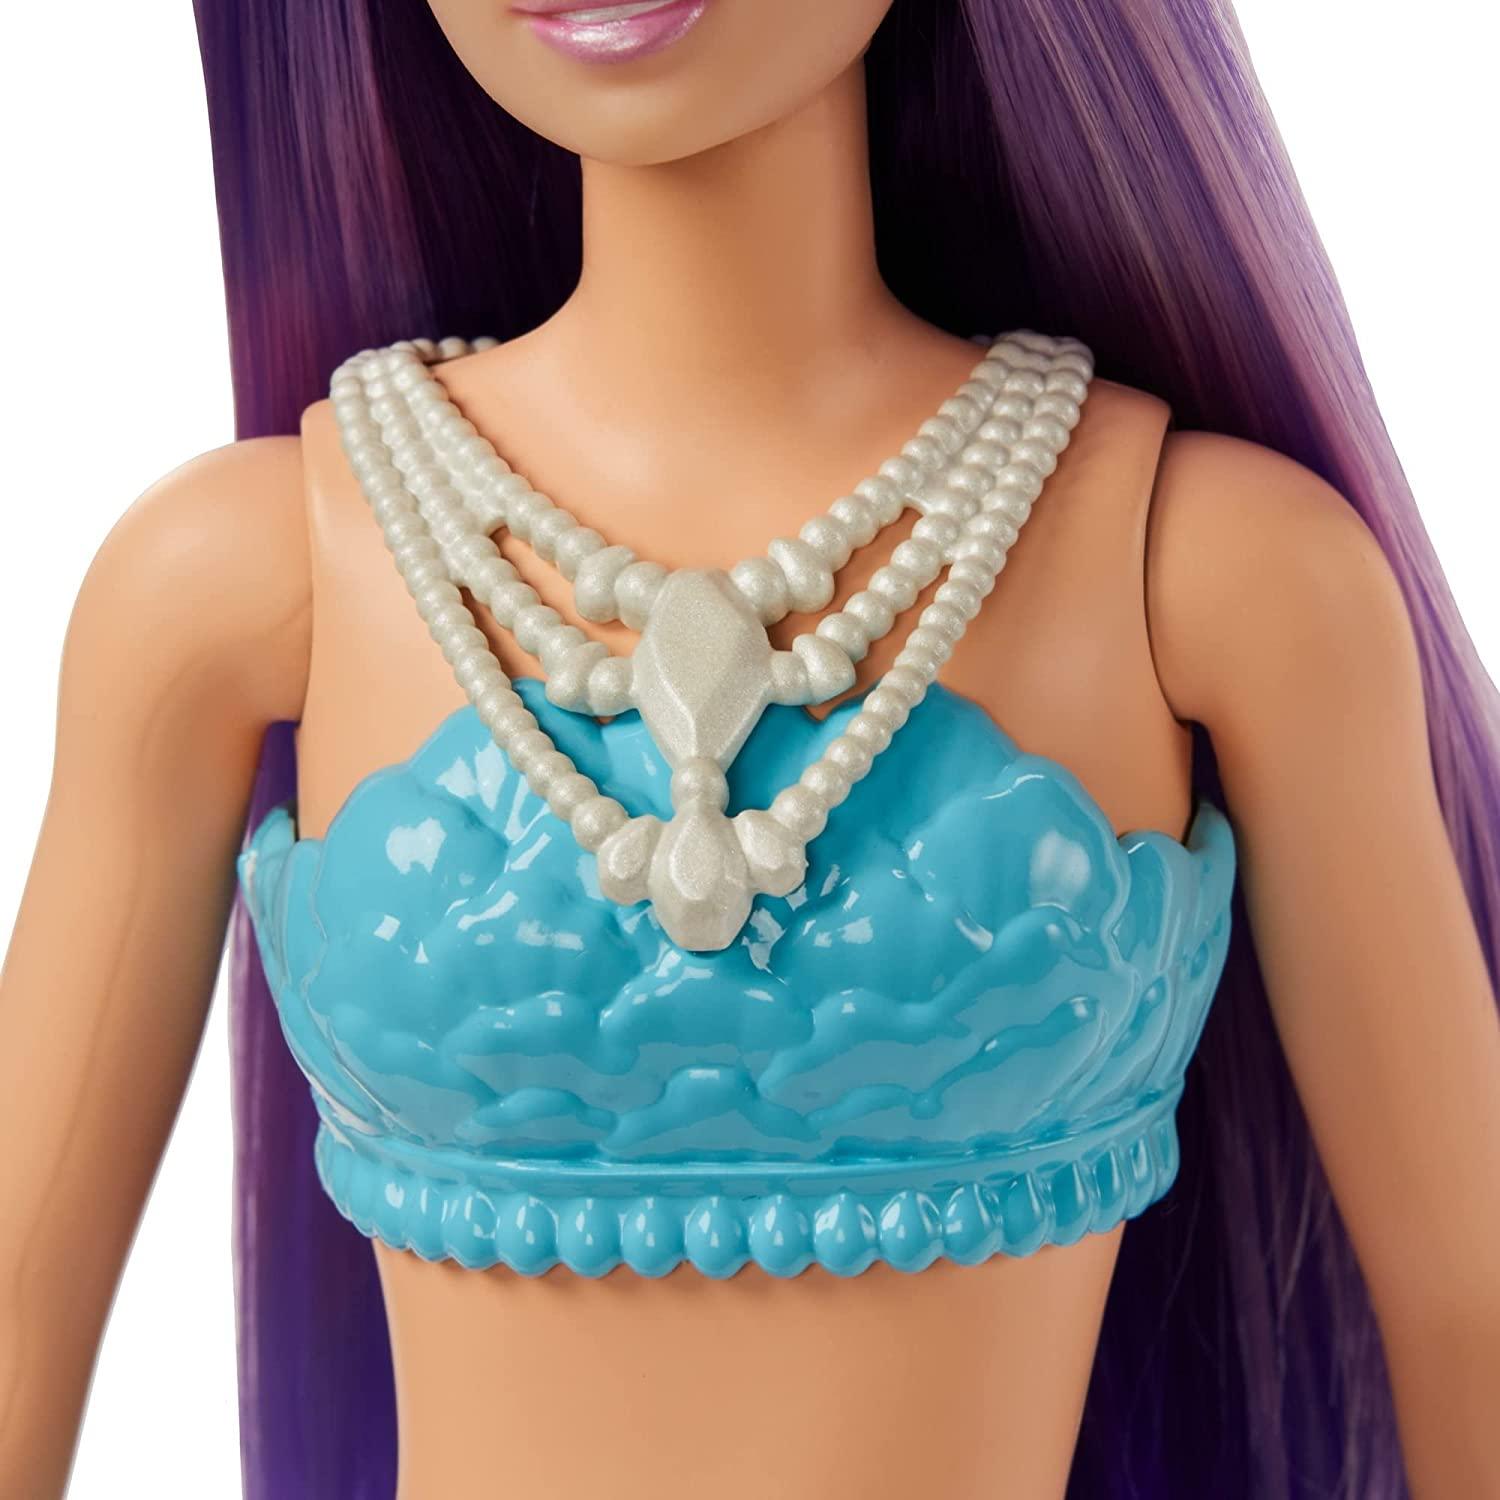 Barbie Dreamtopia Mermaid Doll with Purple Hair, Blue & Purple Ombre Tail & Tiara Accessory - BumbleToys - 5-7 Years, Barbie, Fashion Dolls & Accessories, Girls, Mermaid, Pre-Order